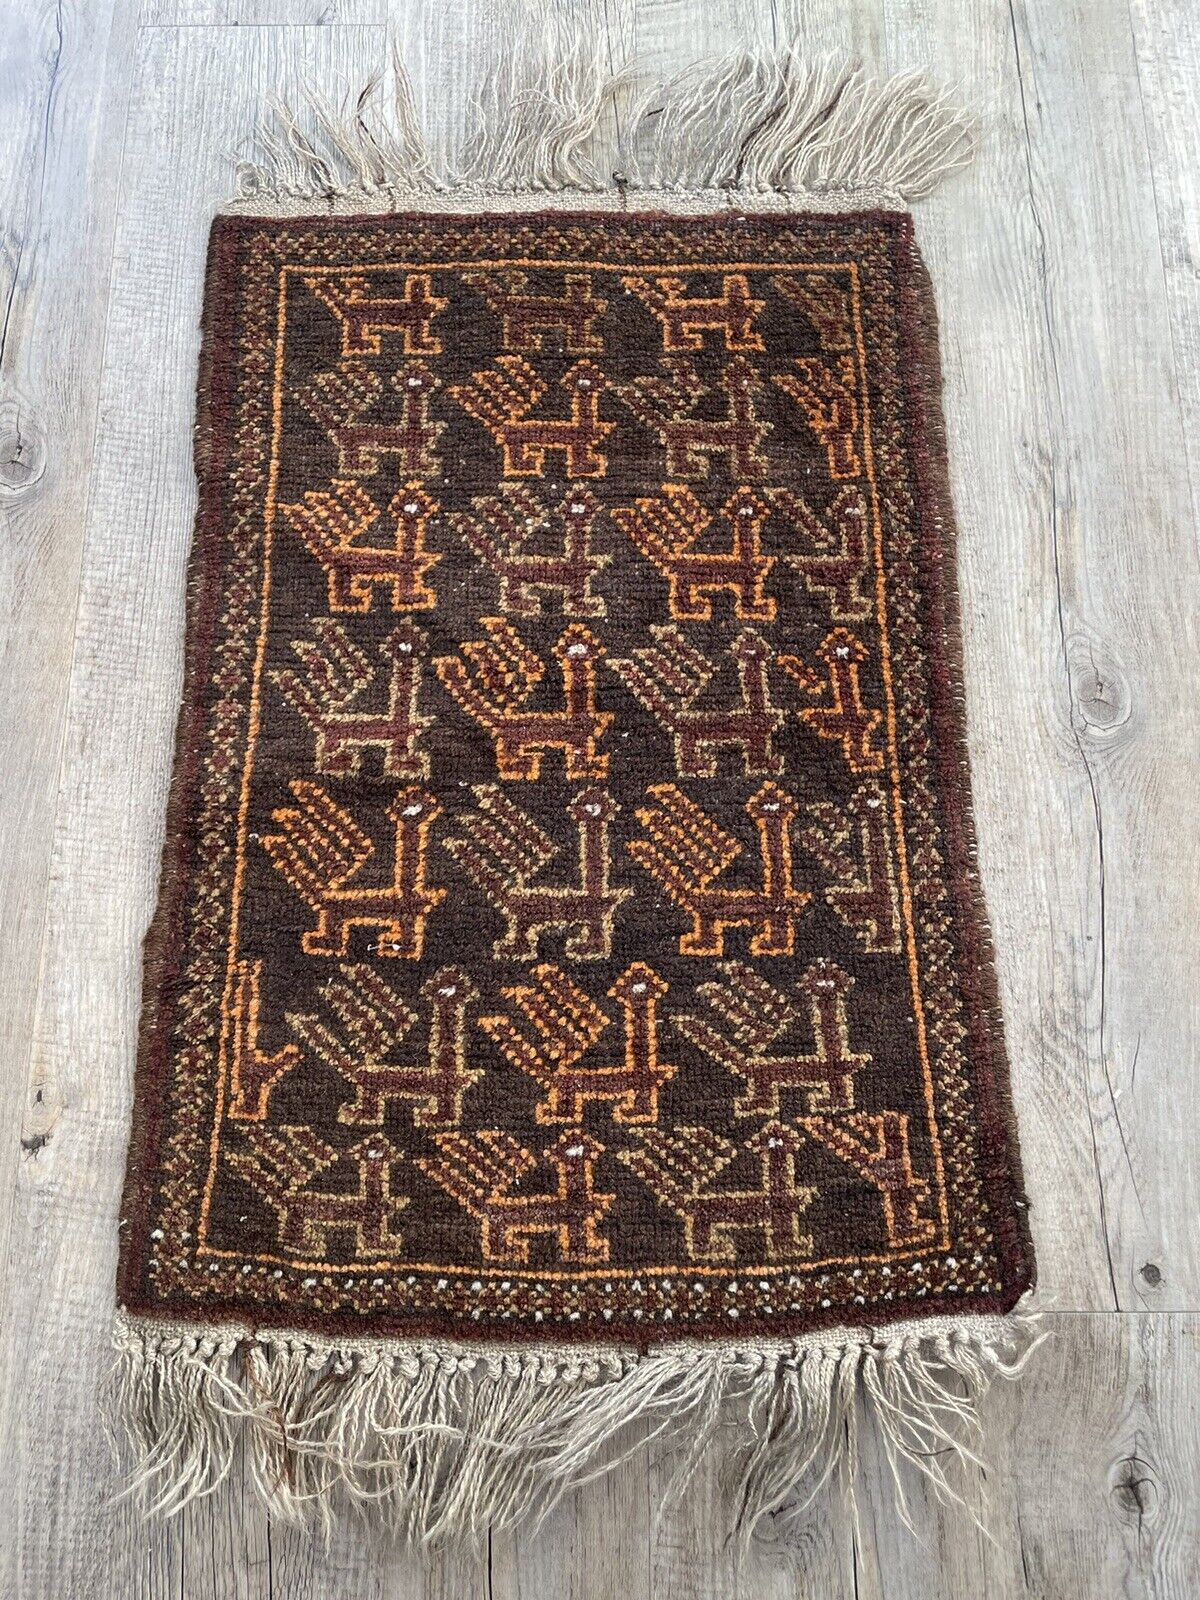 Handmade Vintage Afghan Baluch Collectible Rug - 1940s - Unique repeating animal design showcased in a small-sized rug.